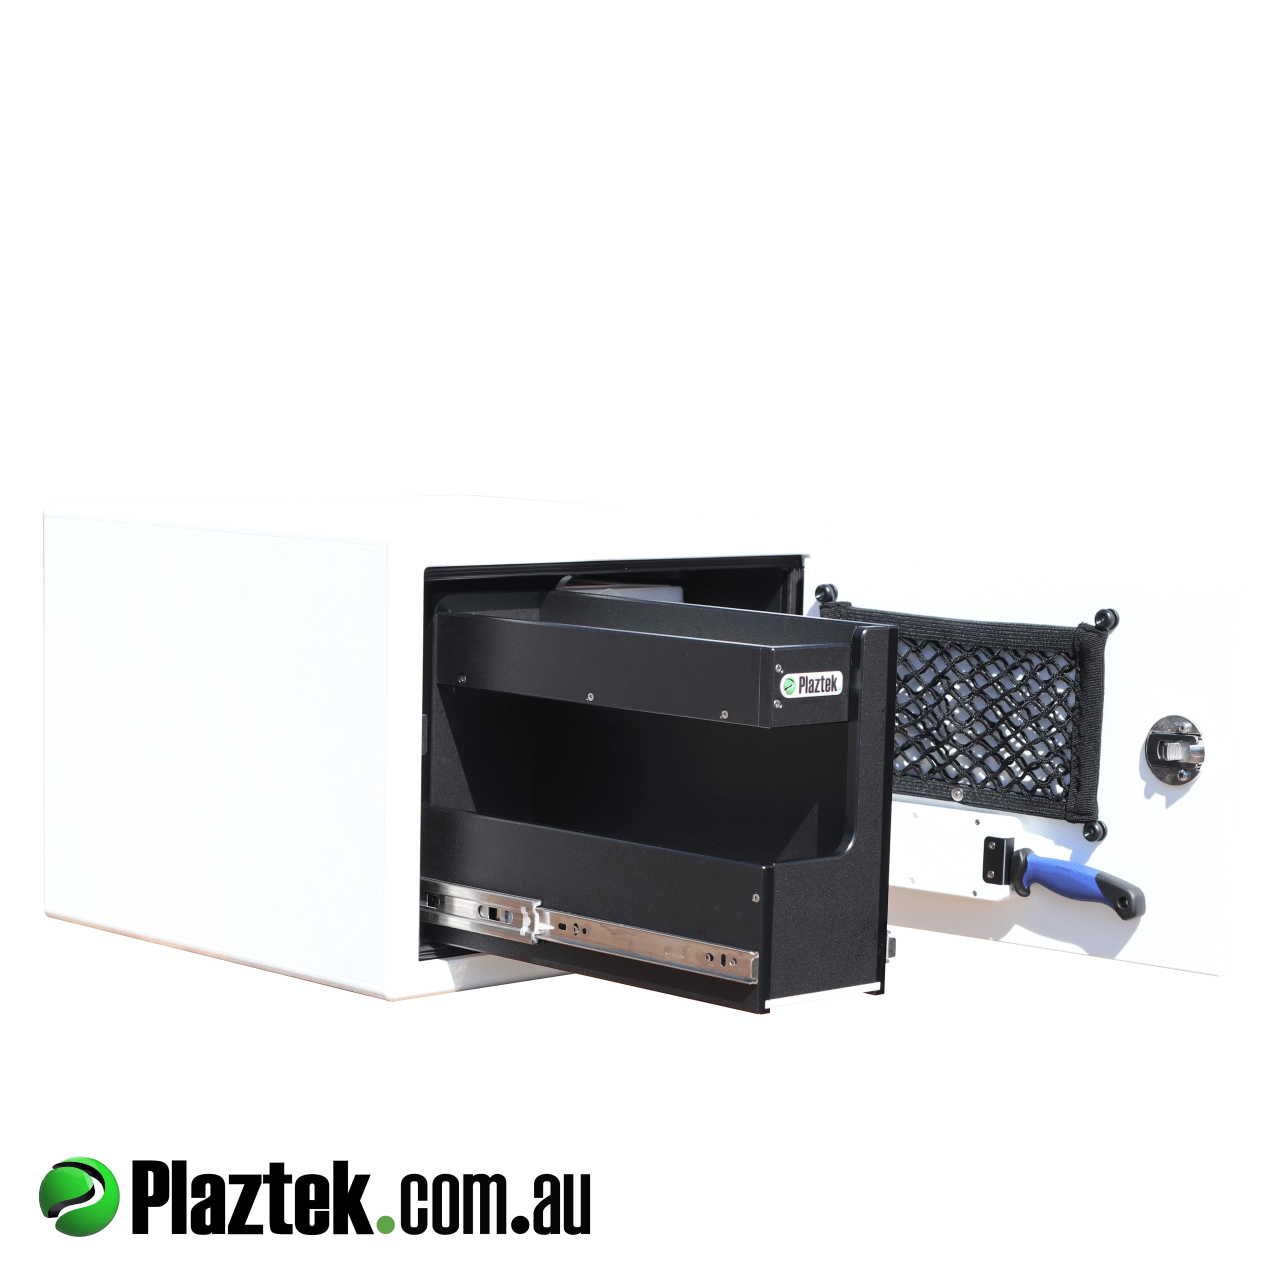 Plaztek seat box with tackle tray storage and pull-out drawer, Australian made product to custom sizes